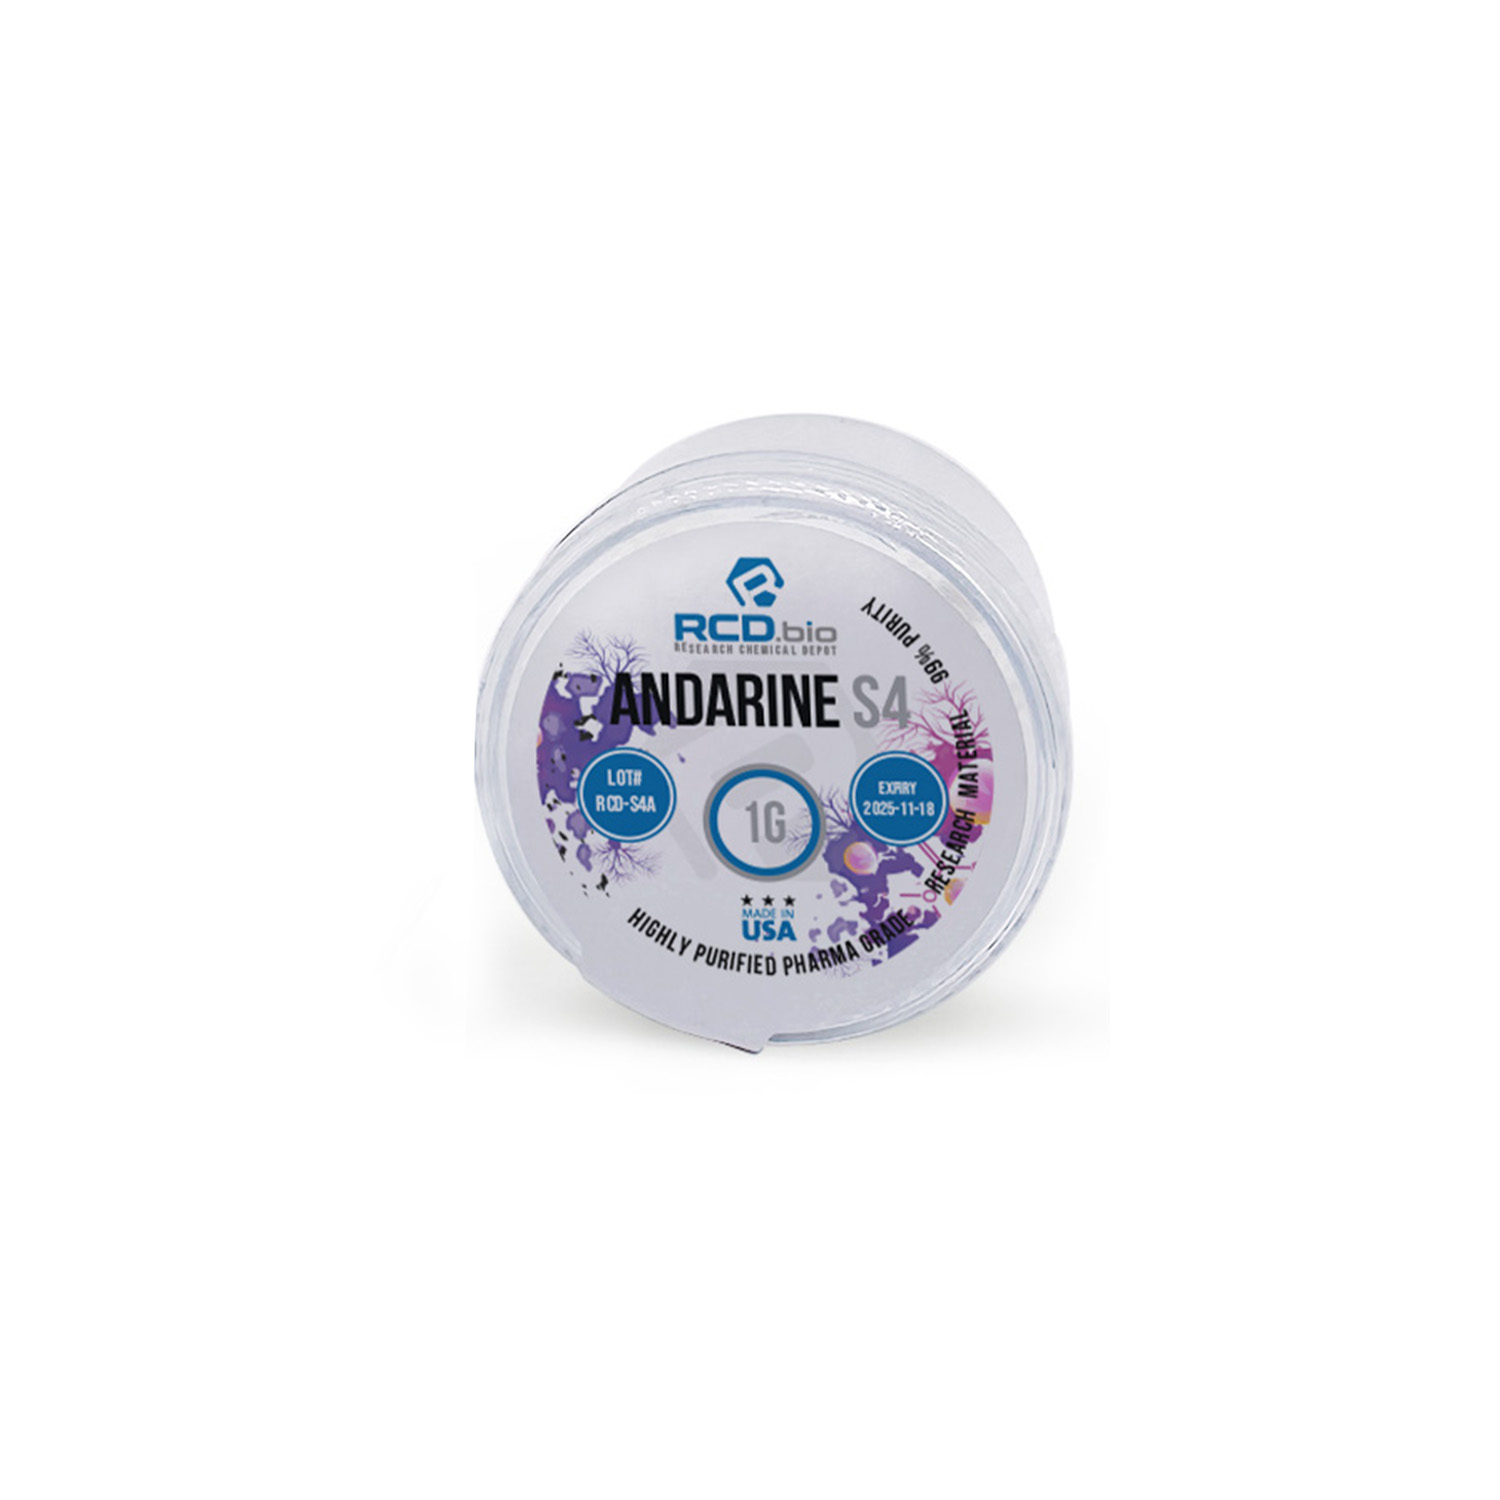 Andarine S4 Powder For Sale in USA | Fast Shipping | RCD.bio